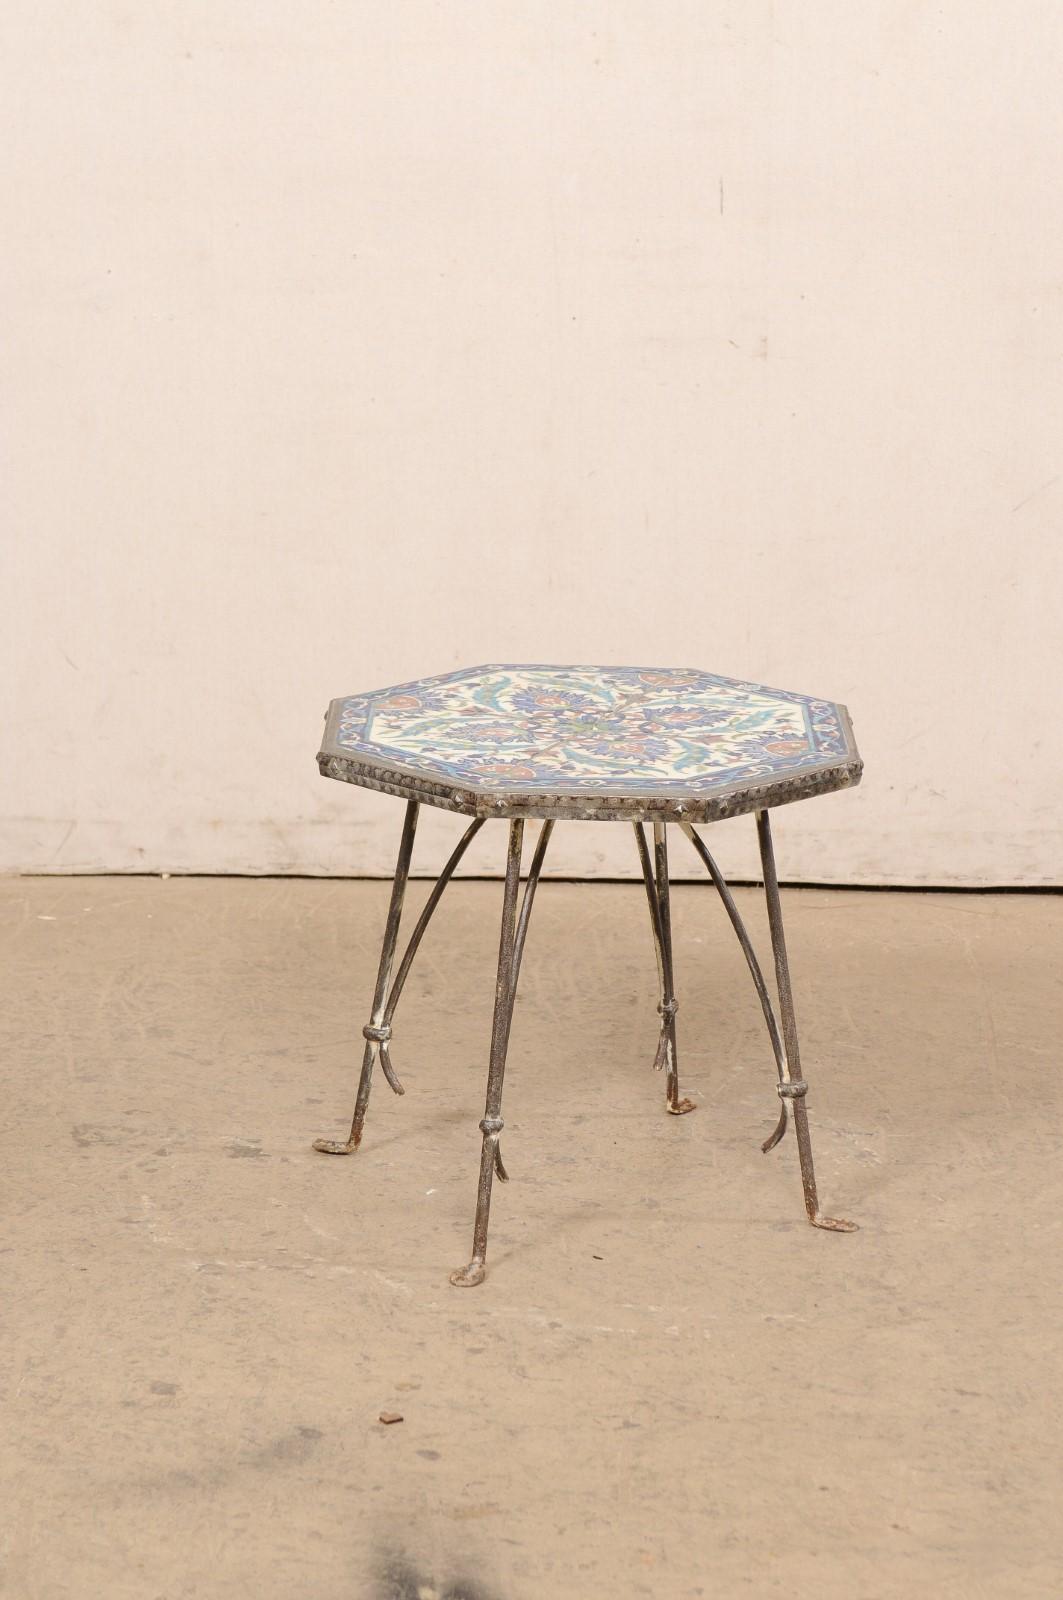 A Spanish iron accent table with tile top from the early 20th century. This antique table from Spain has an octagonal shaped top with vibrant ceramic tiles recessed within the iron lip, raised upon four slender legs (Etruscan style) that terminate